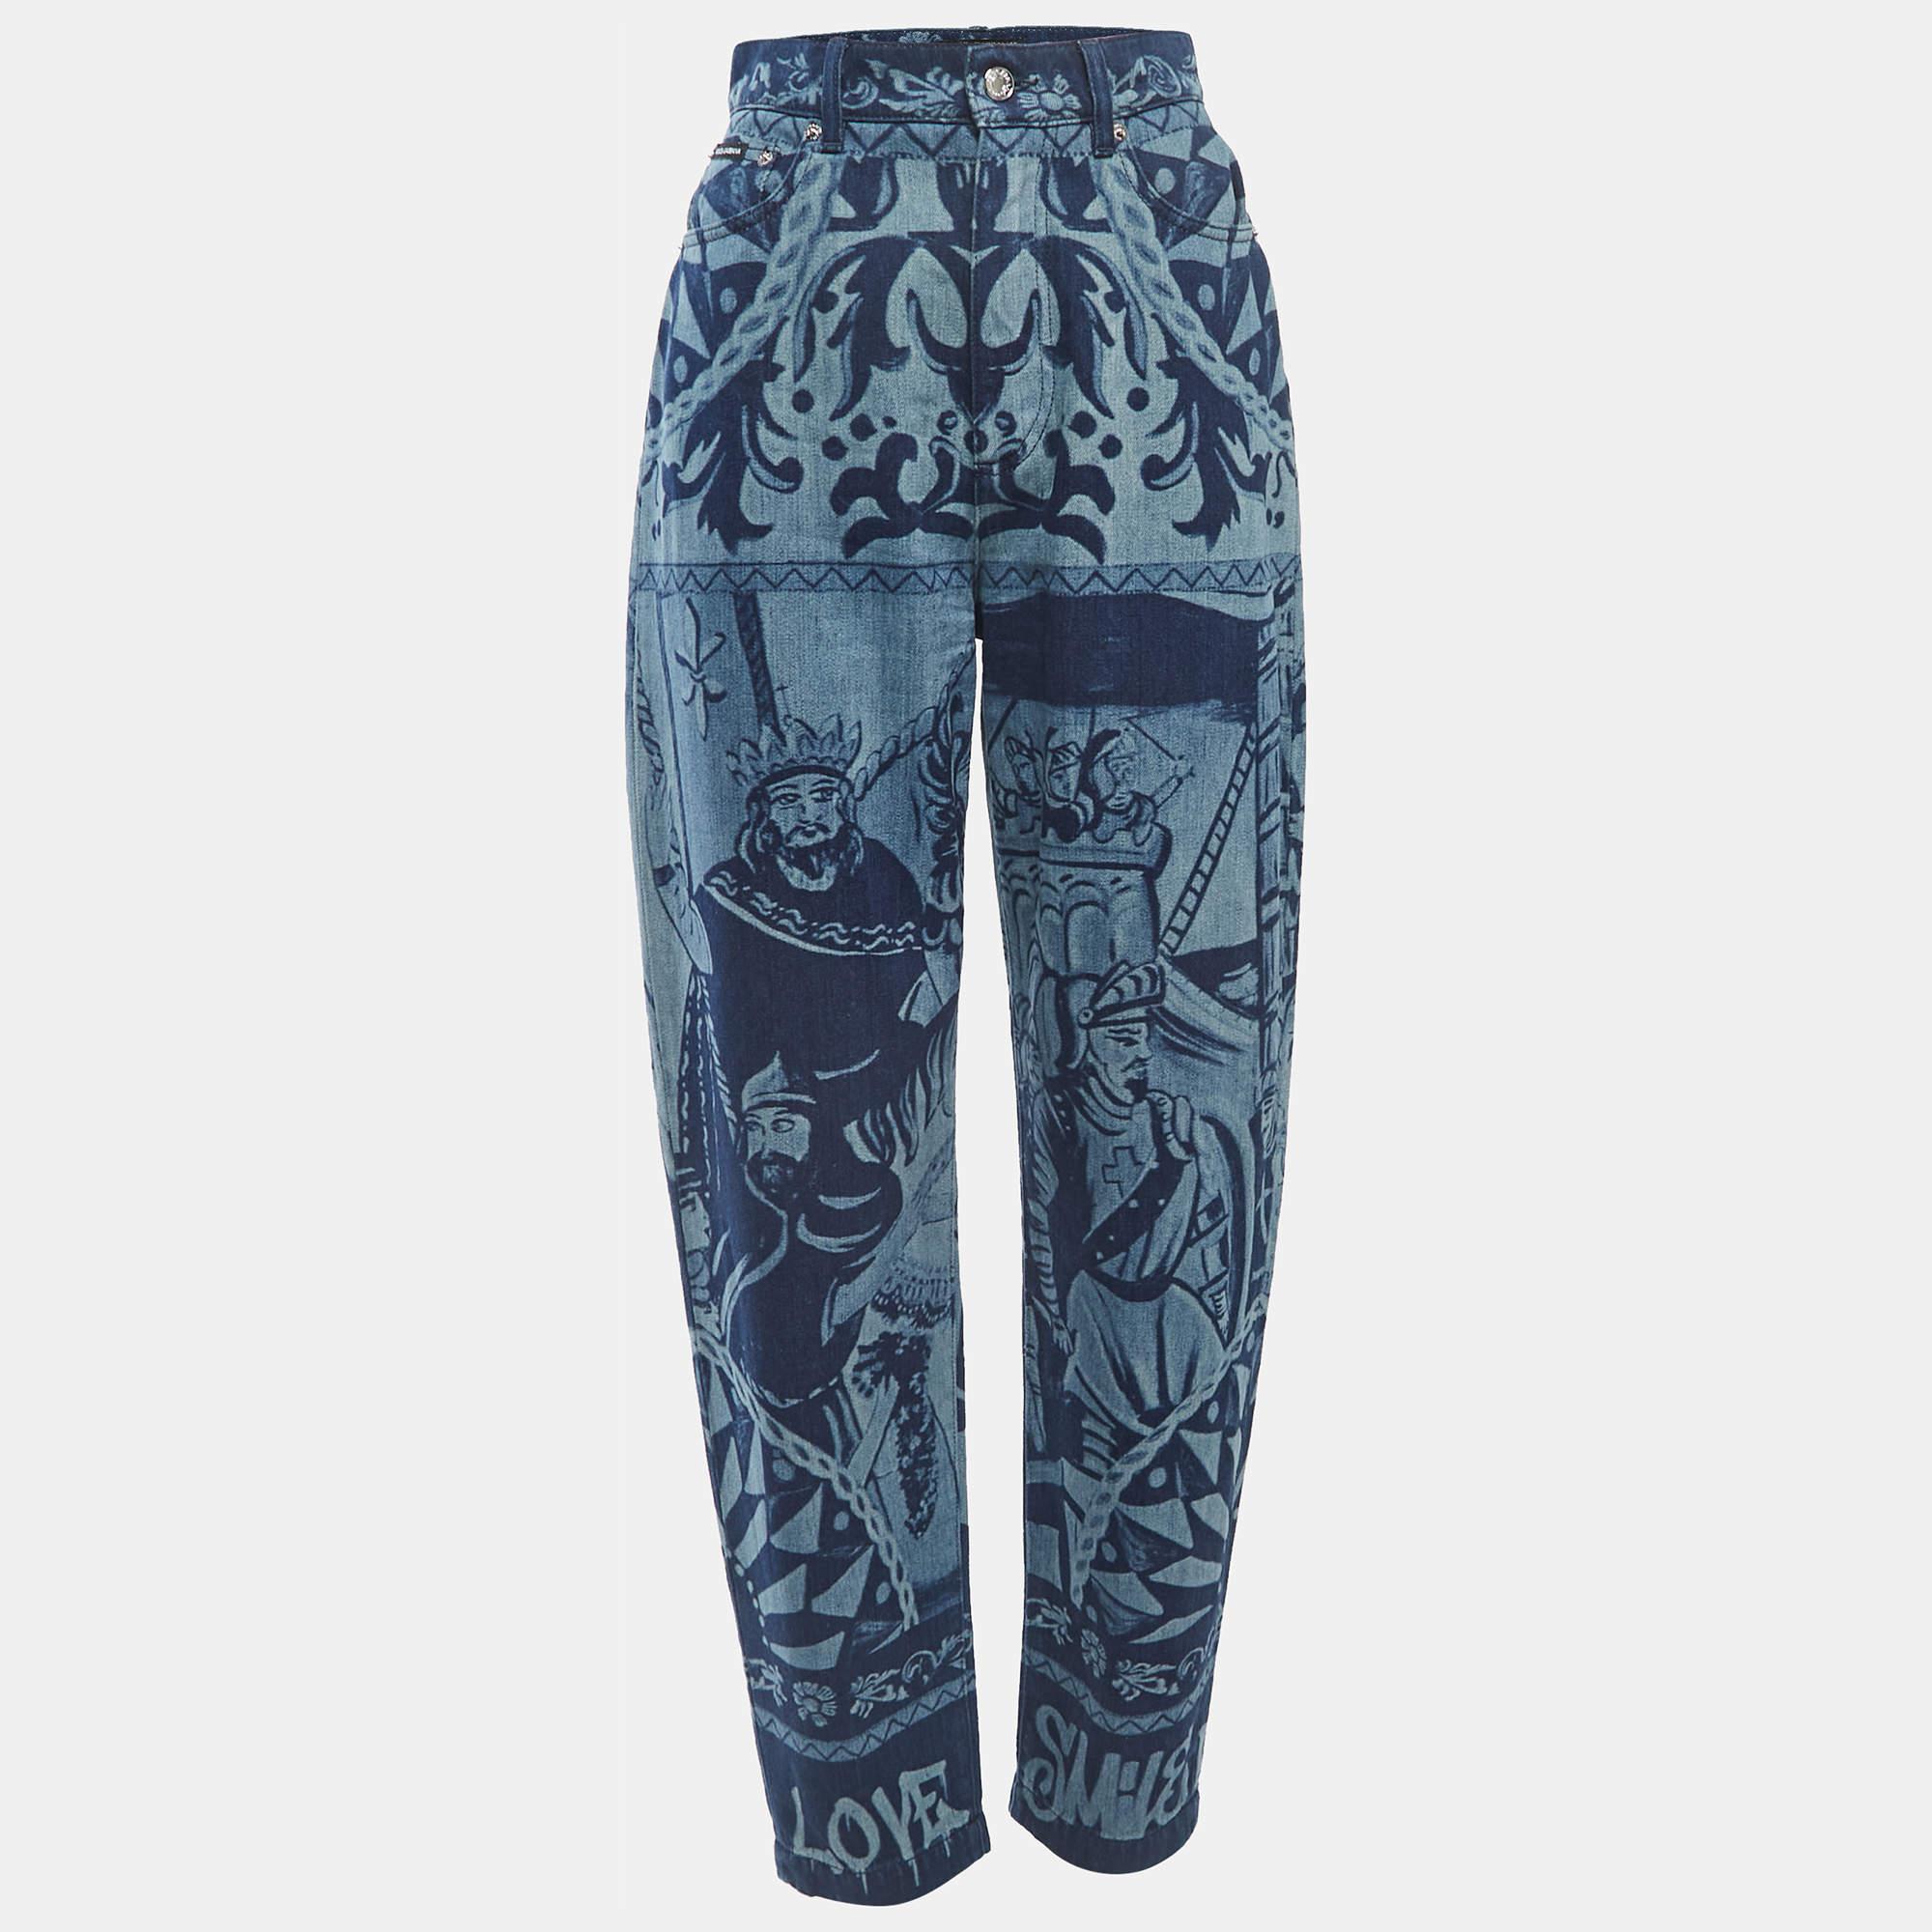 These Dolce & Gabbana jeans are a must-have wardrobe essential. These high-waist boyfriend jeans can be dressed both up and down for looks that are either casual and comfy or chic and fashionable.

